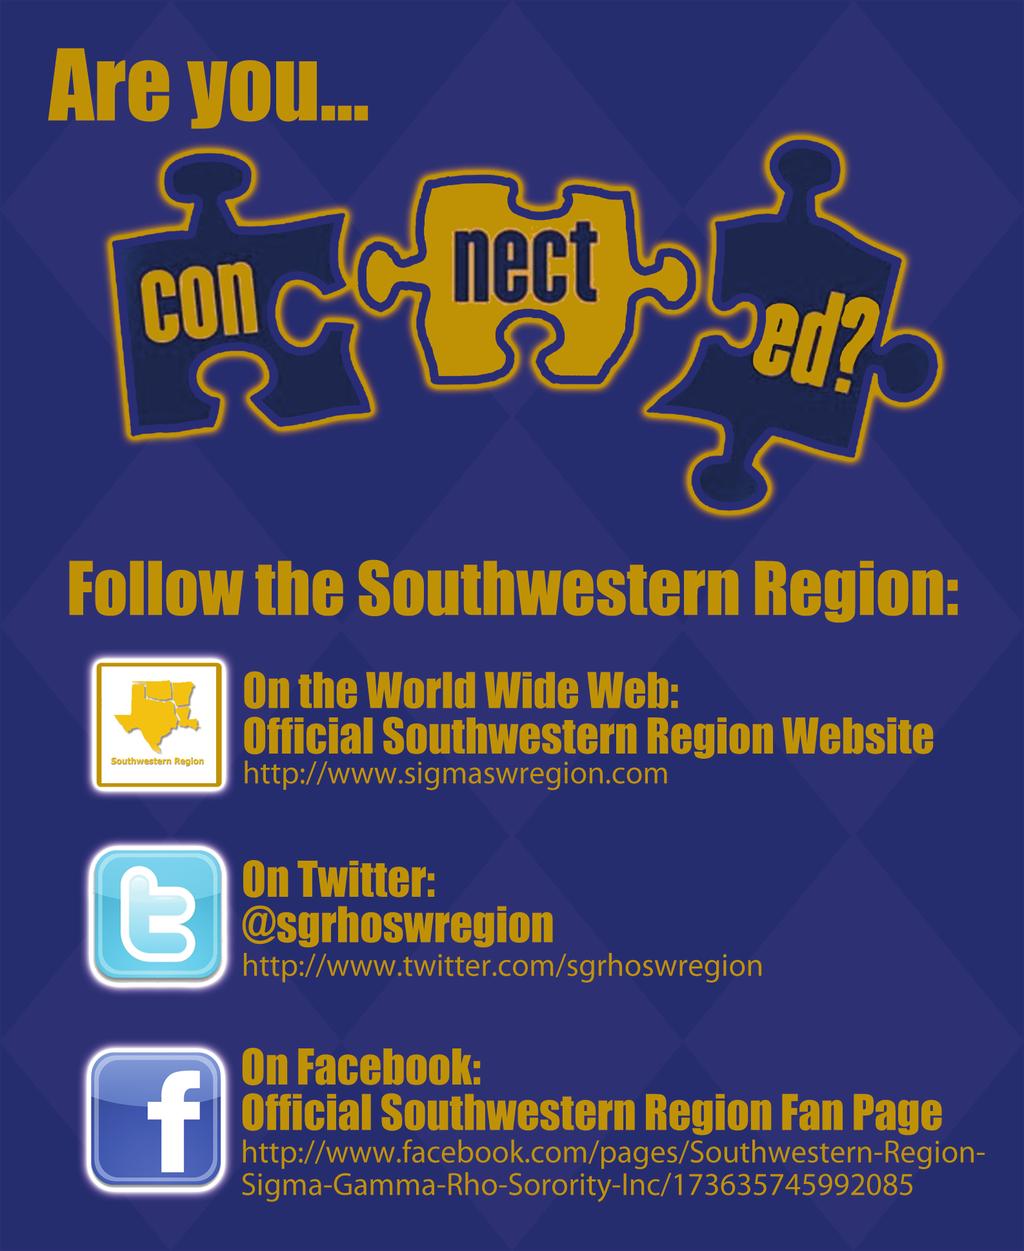 One of the special features of the new site is members can The Southwestern Region of Sigma Gamma Rho new website launched on December 2010 at: www.sigmaswregion.com.